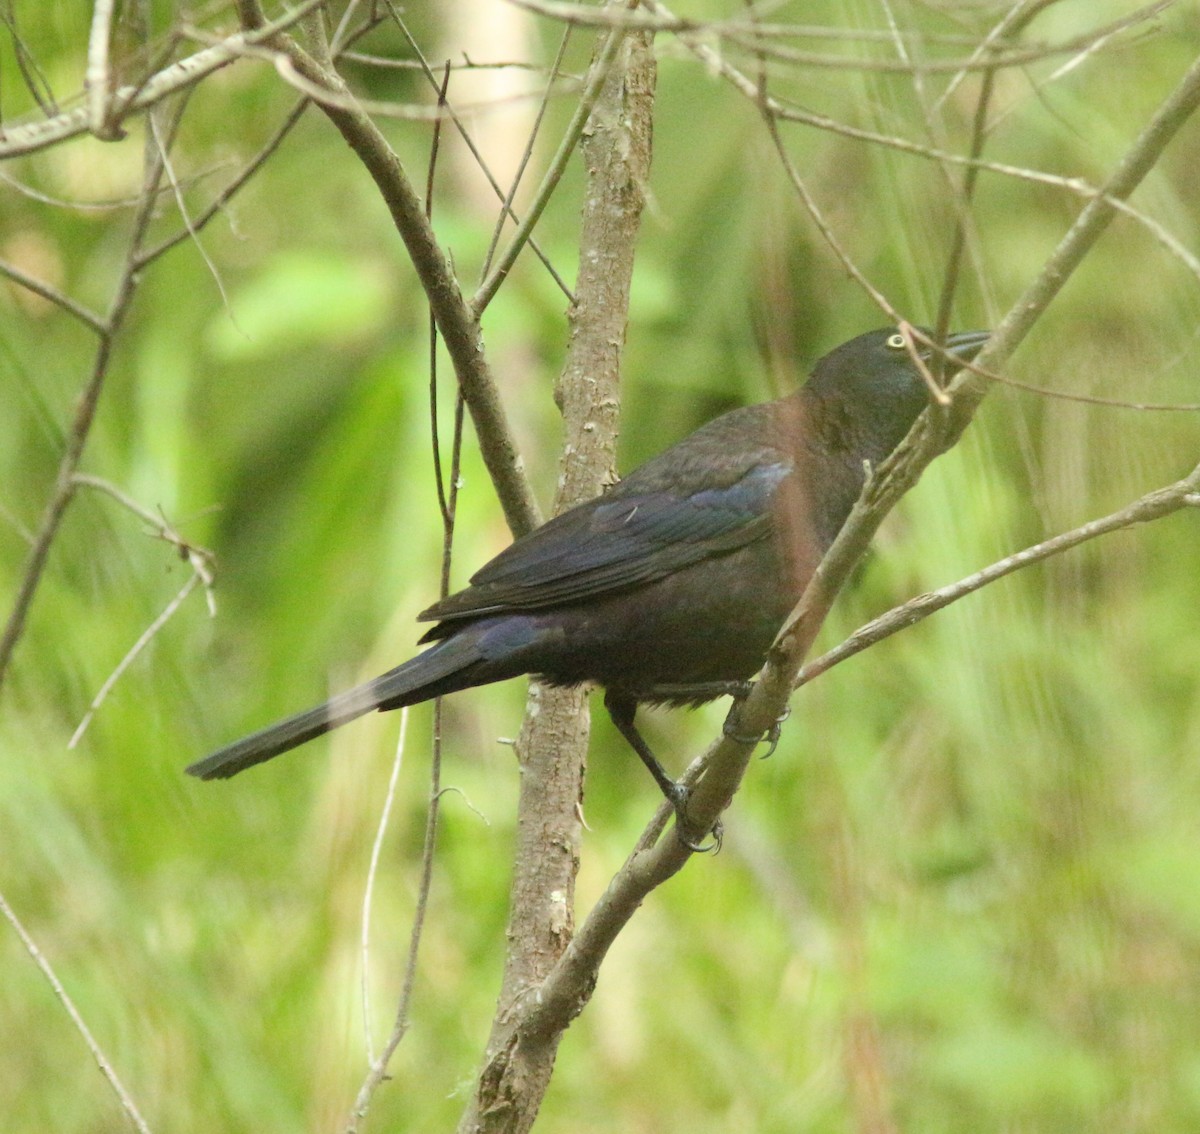 Common Grackle - Daphne Asbell